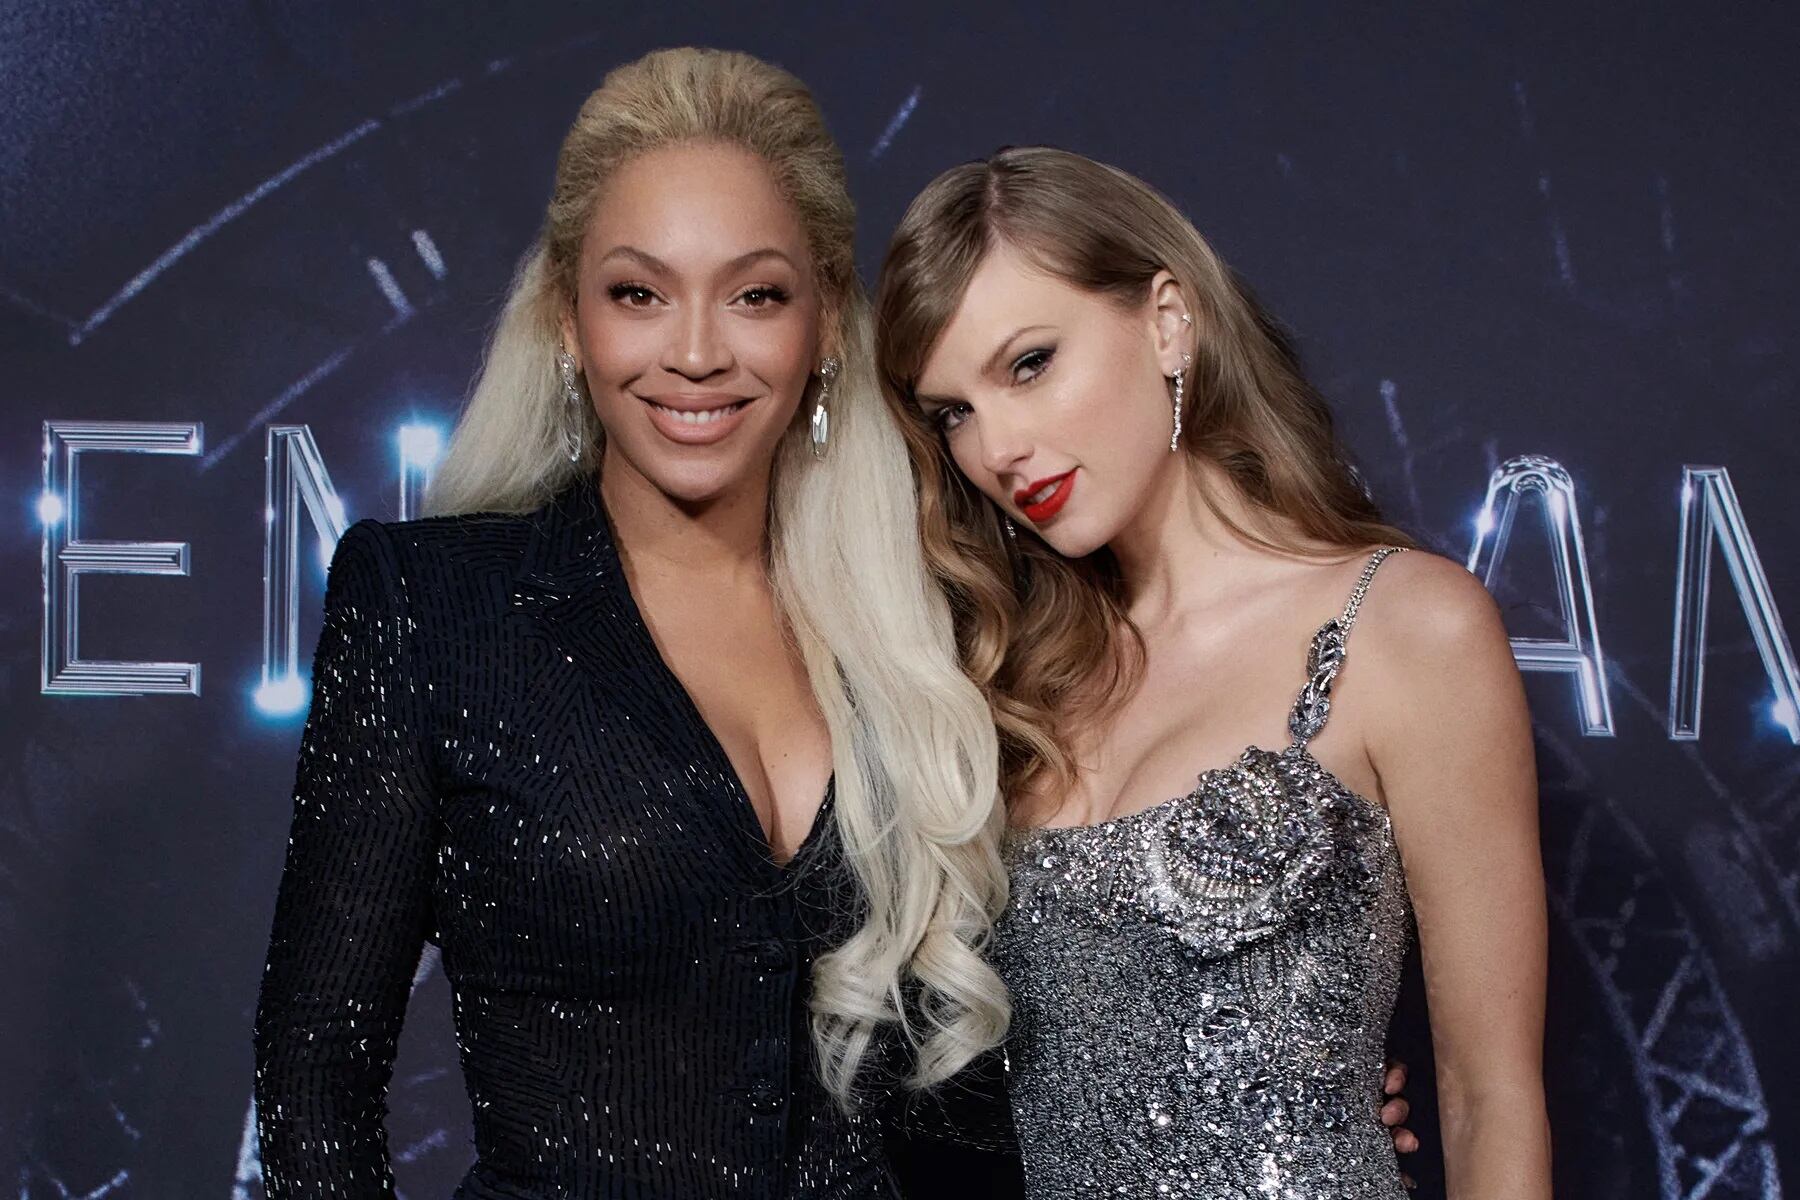 AMC's Revenue Soars With Taylor Swift And Beyoncé Concert Movies